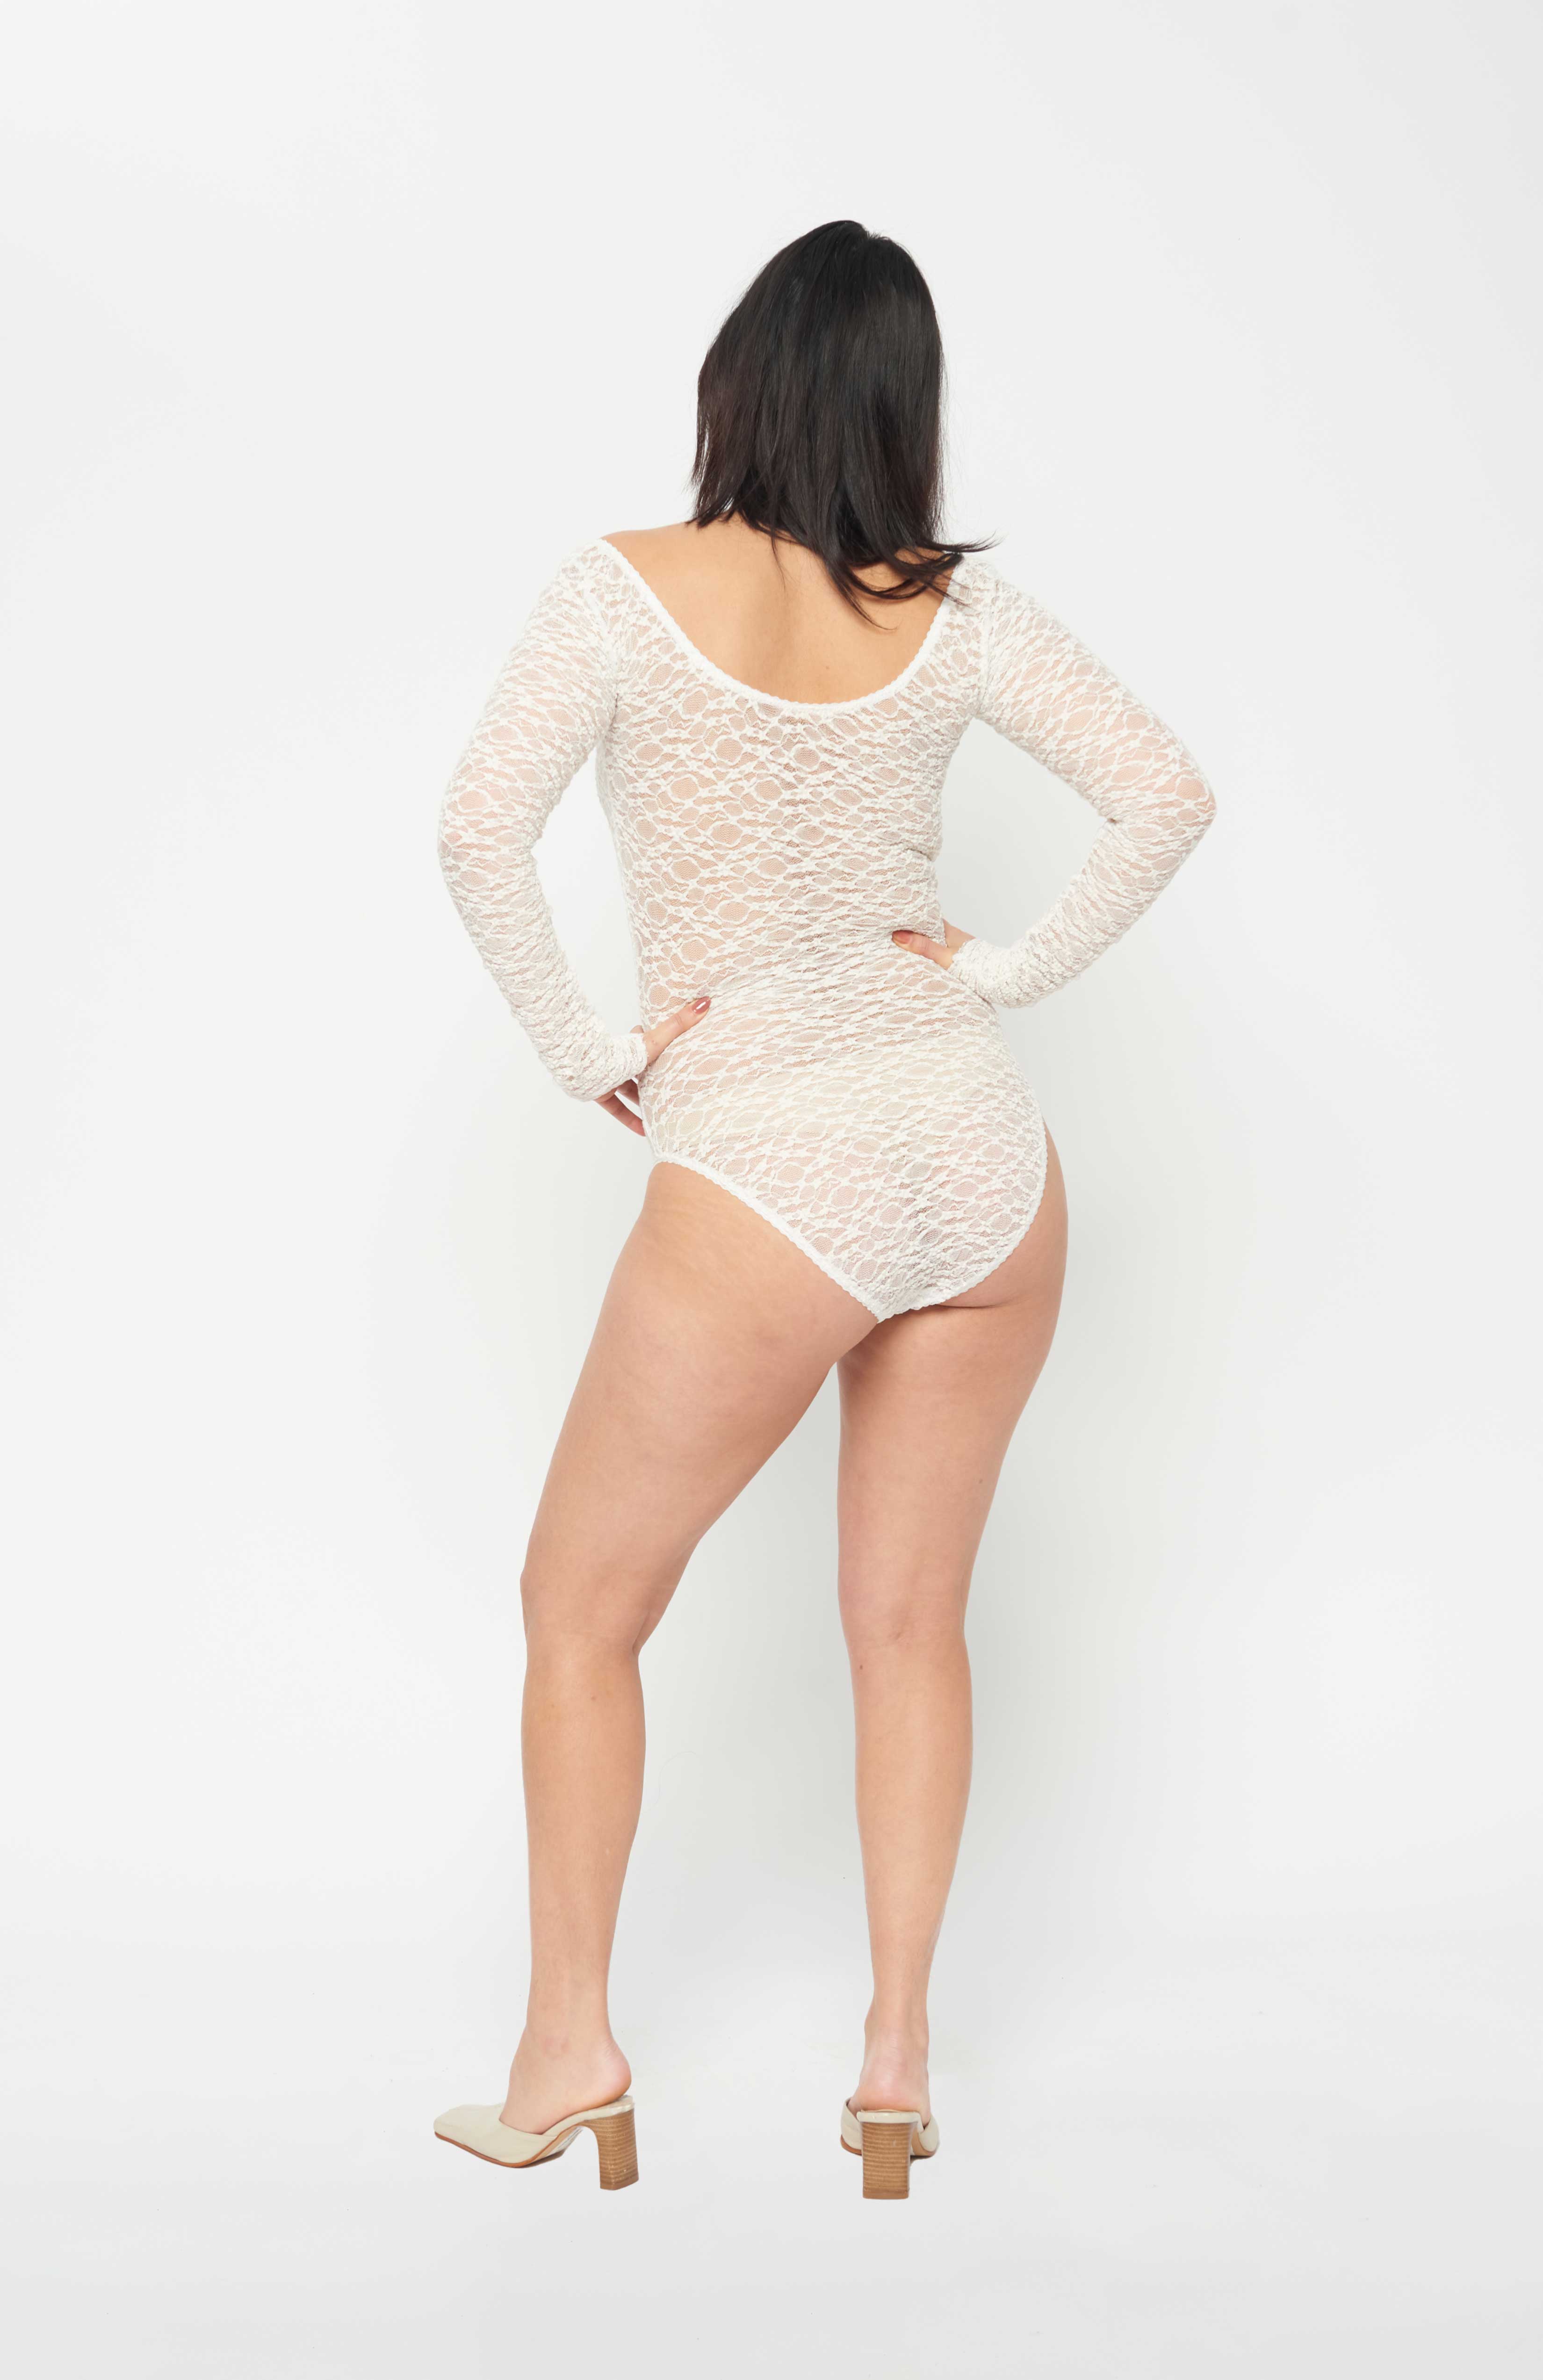 Maroske Peech A reprise of our signature stretch soft cup leotard in stunning ivory lace. Features a snap opening at gusset for ease wearer and zig-zag decorative stitching with a scalloped elastic detail. 